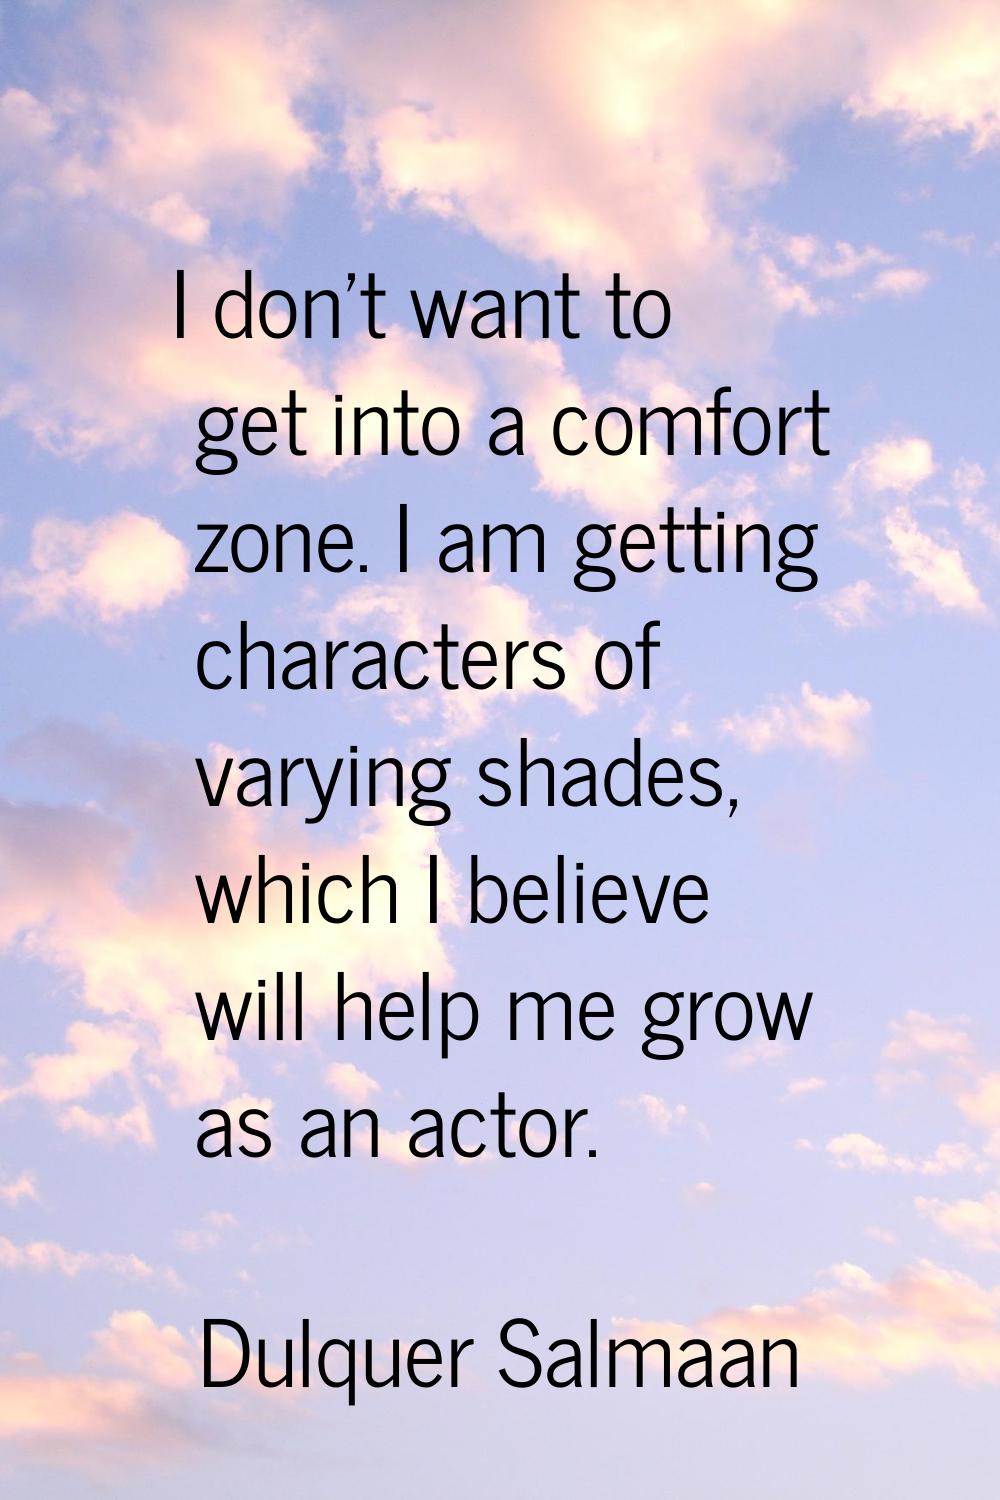 I don't want to get into a comfort zone. I am getting characters of varying shades, which I believe